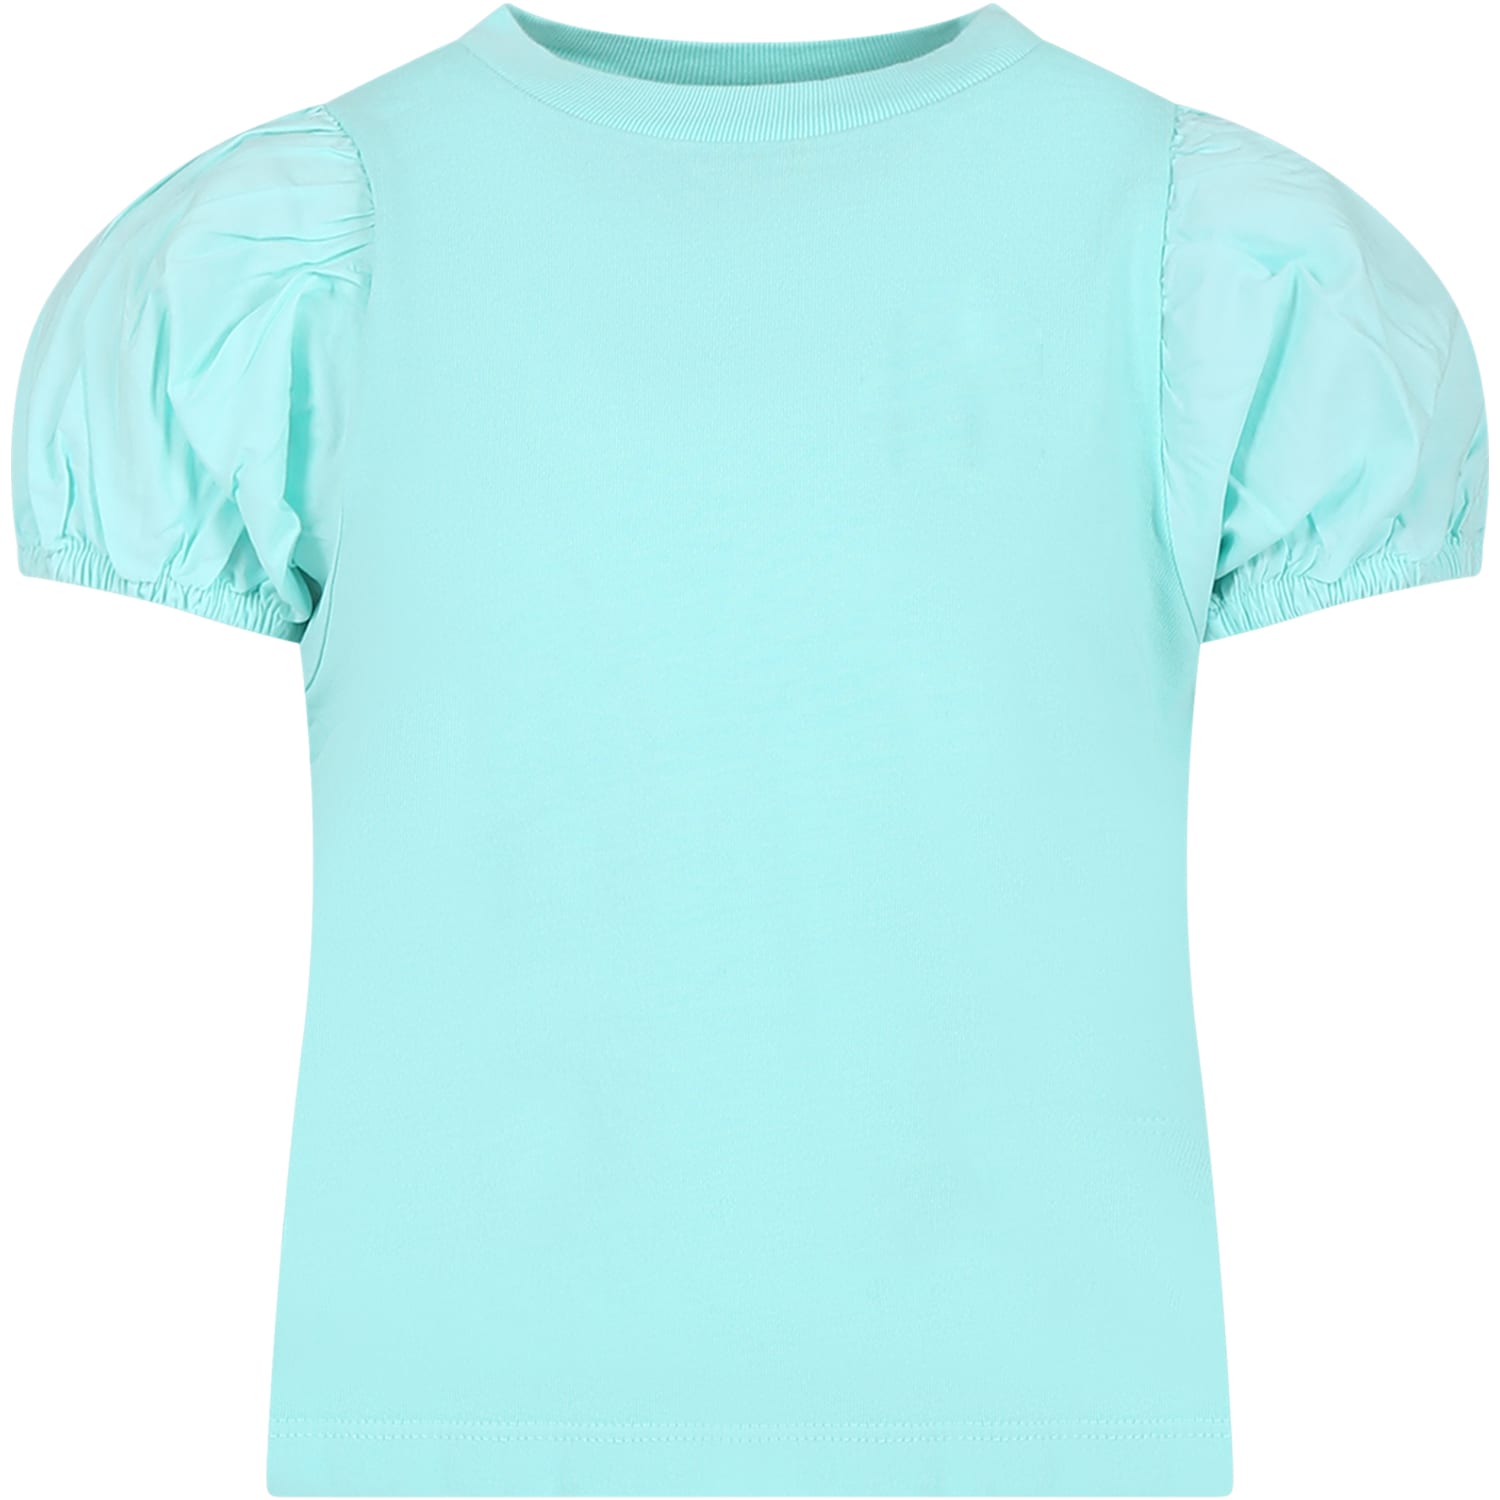 Molo Kids' Light Blue T-shirt For Girl With Print